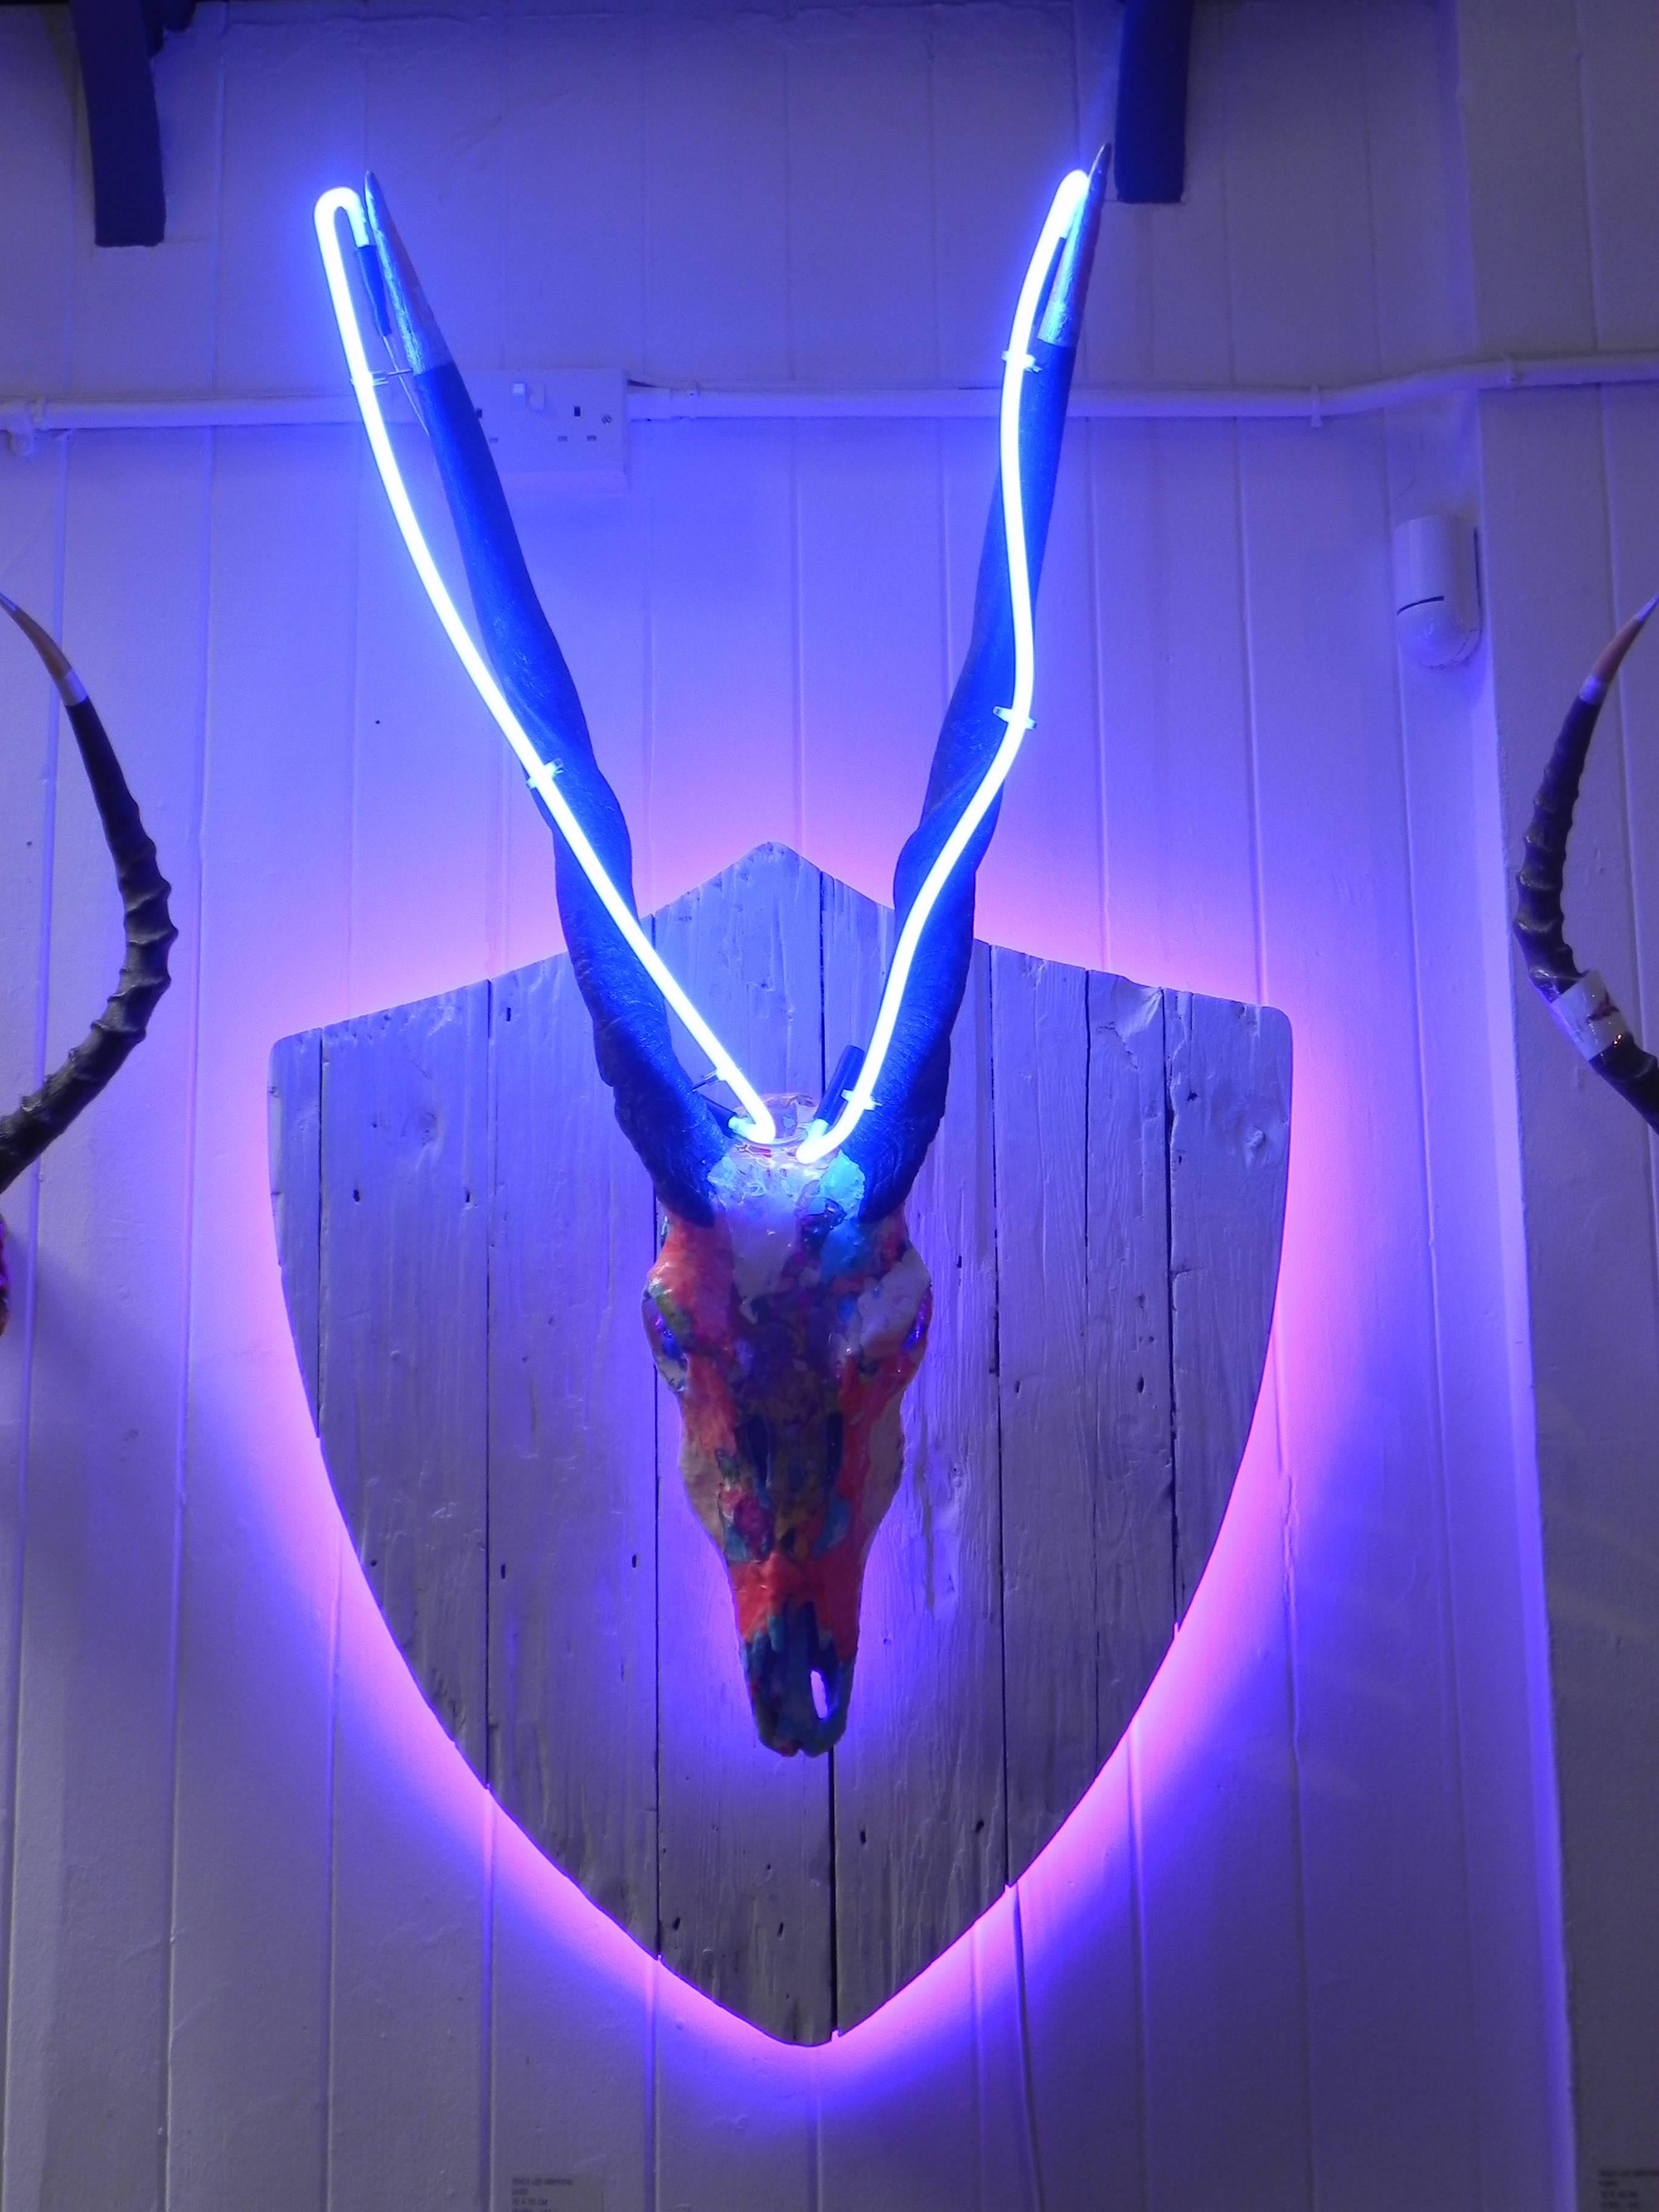 Daisy 
By artist Tracy Lee Griffith. Co-produced by Marcus Bracey.
Ethically sourced skull with horns coated in mixed paint and resin. Neon tracing the horns and an LED backlight, which changeable coloring.
Unique edition 1/1. 
Dimensions: 72 X